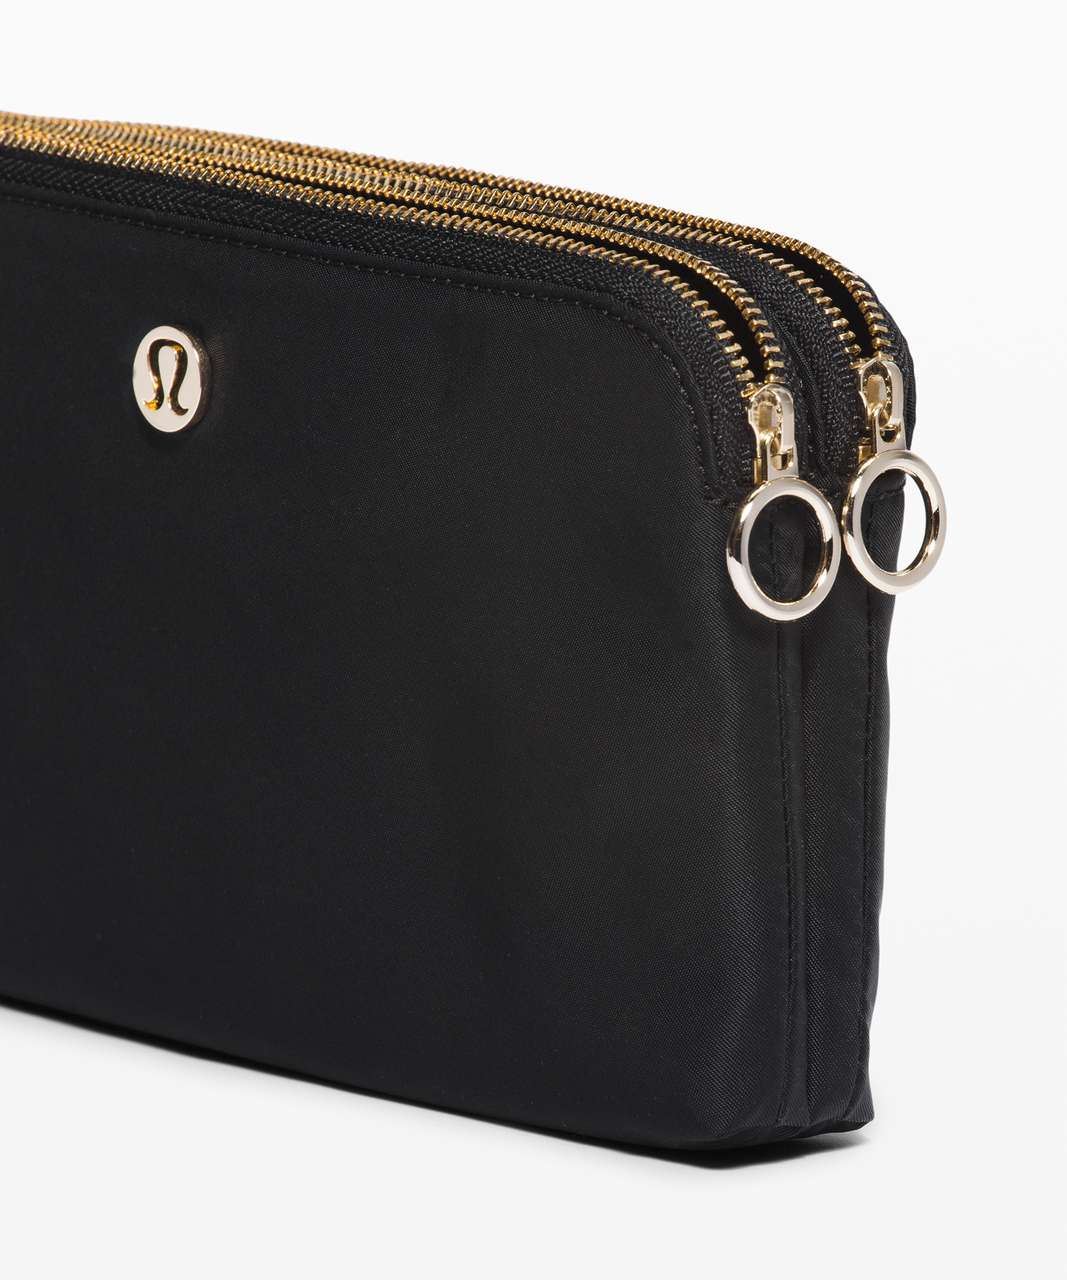 Lululemon Now and Always Pouch - Black / Gold (First Release)